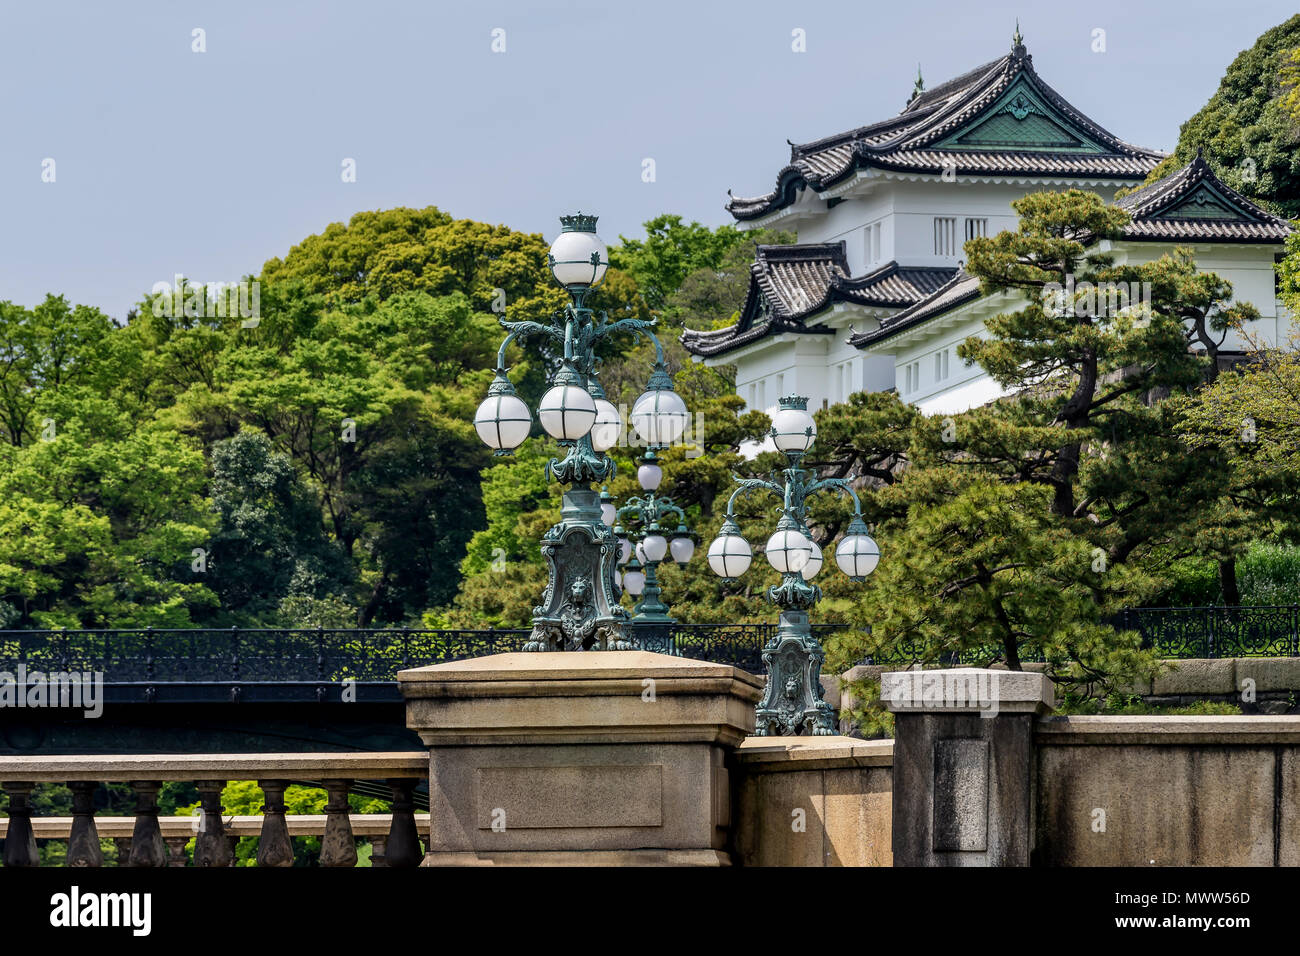 View of the Imperial Palace in the Chiyoda district, Tokyo, Japan Stock Photo